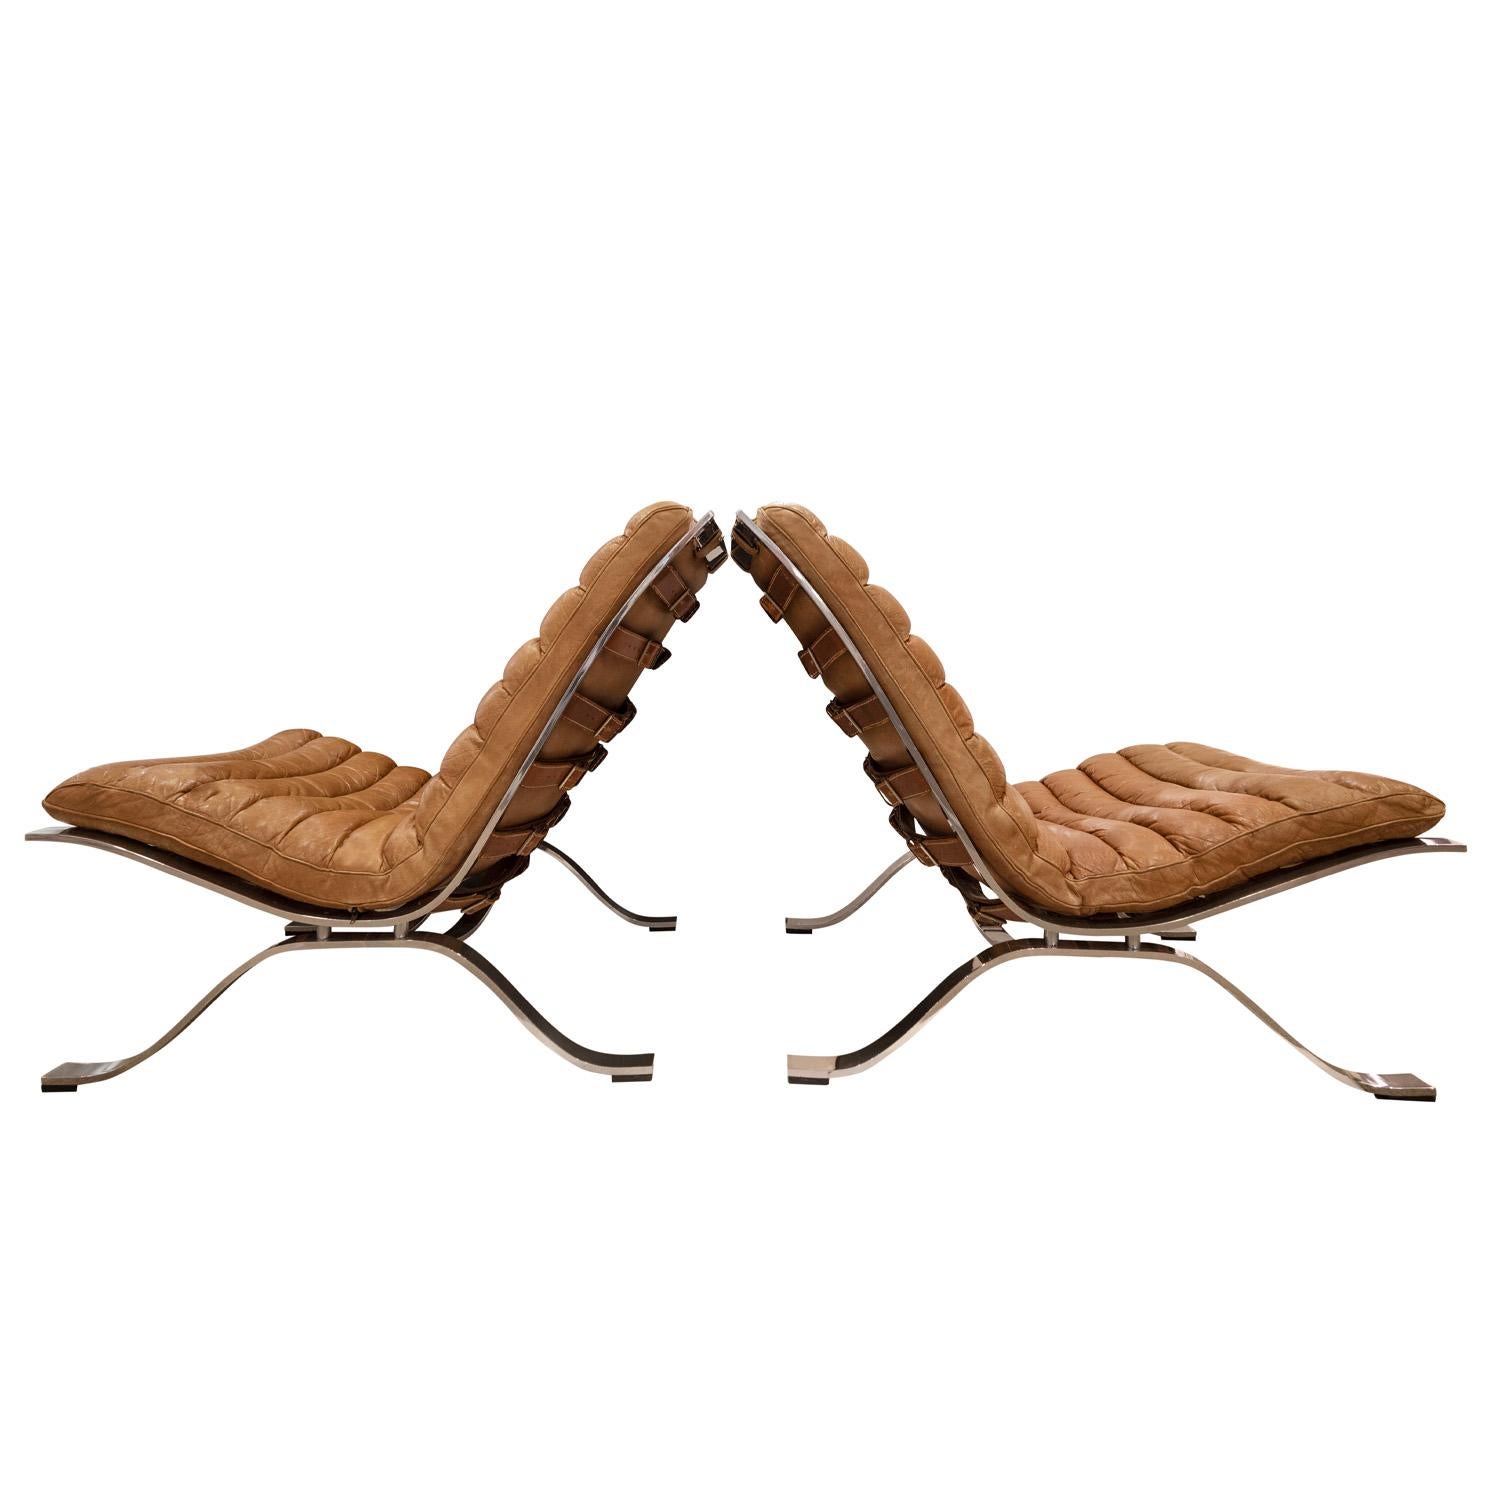 Swedish Arne Norell Pair of Lounge Chairs with Original Leather Slings 1960s (Signed) For Sale